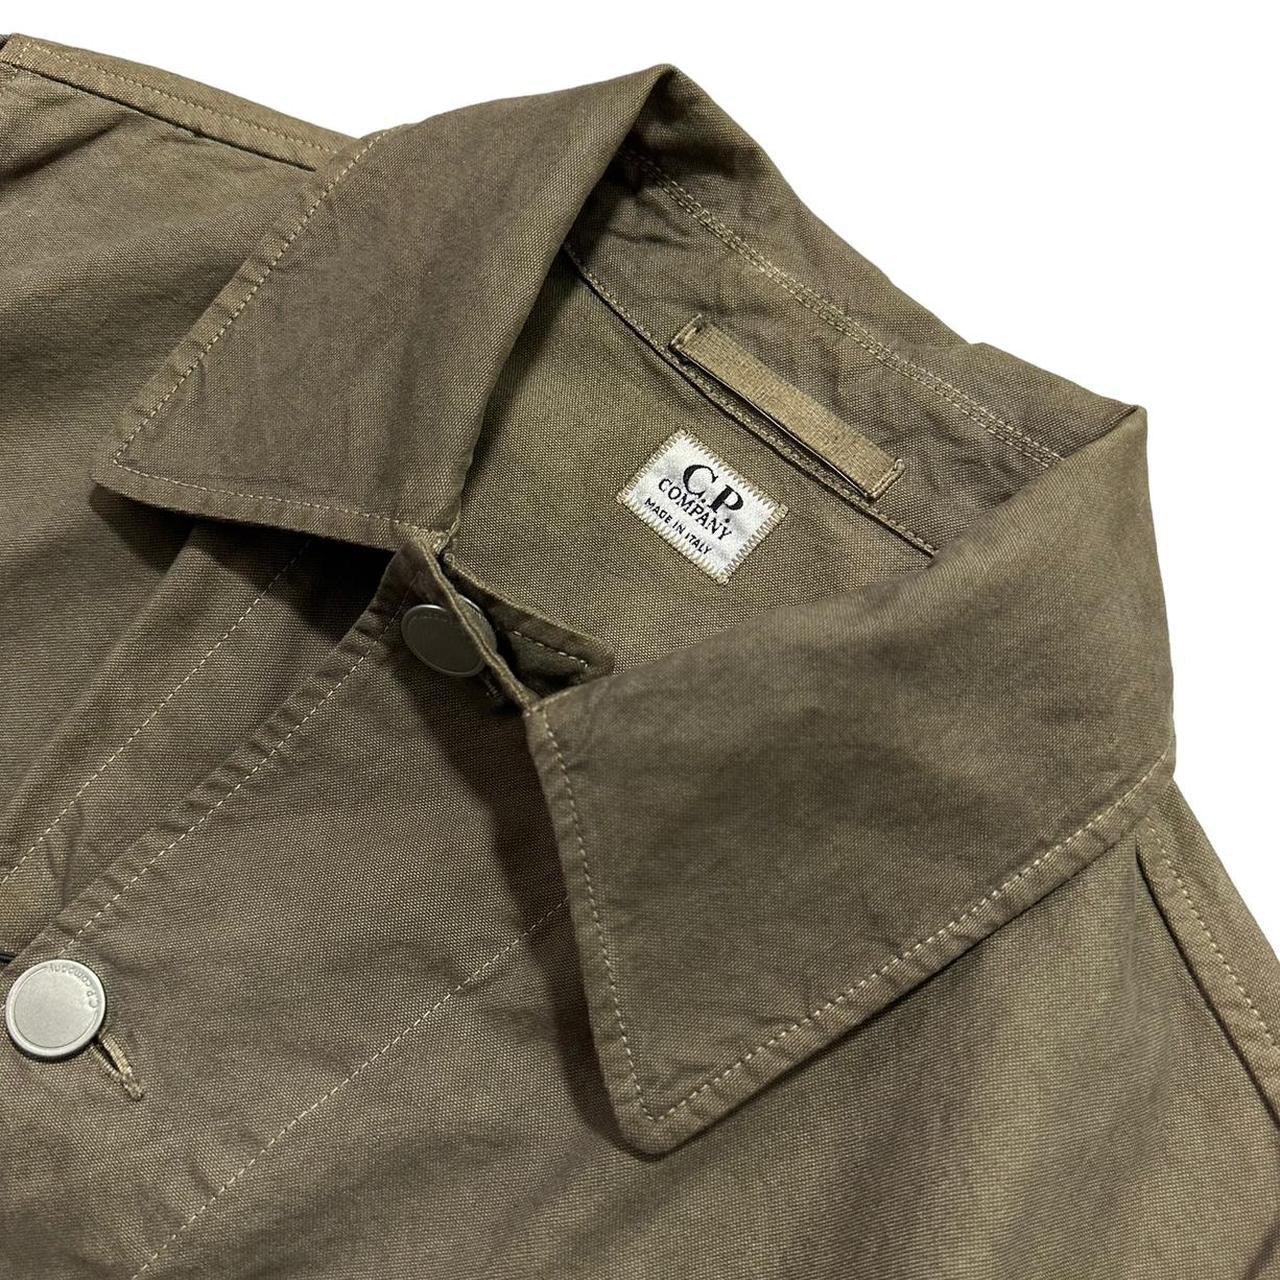 CP Company S/S 2002 Field Overshirt Jacket - Known Source